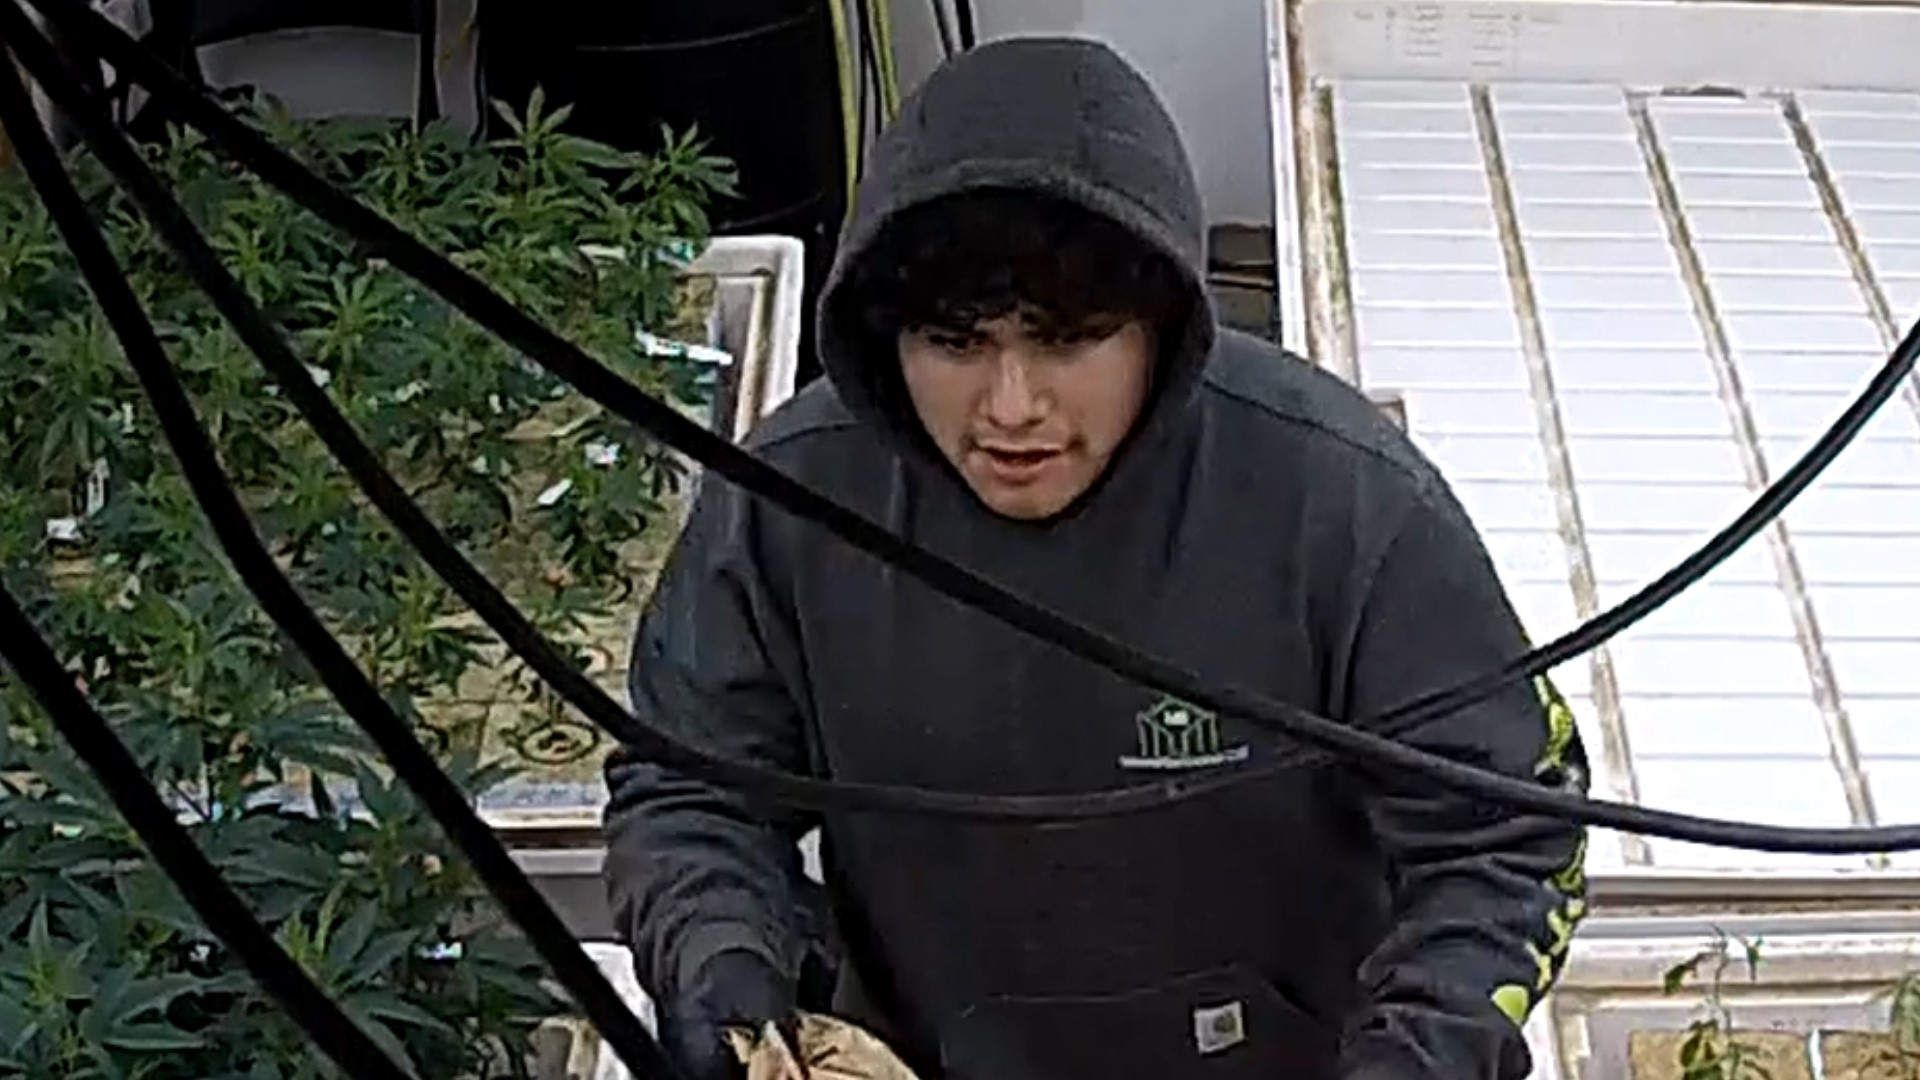 Tumwater police are searching for four suspects who kidnapped a guard and robbed a marijuana warehouse on April 5th